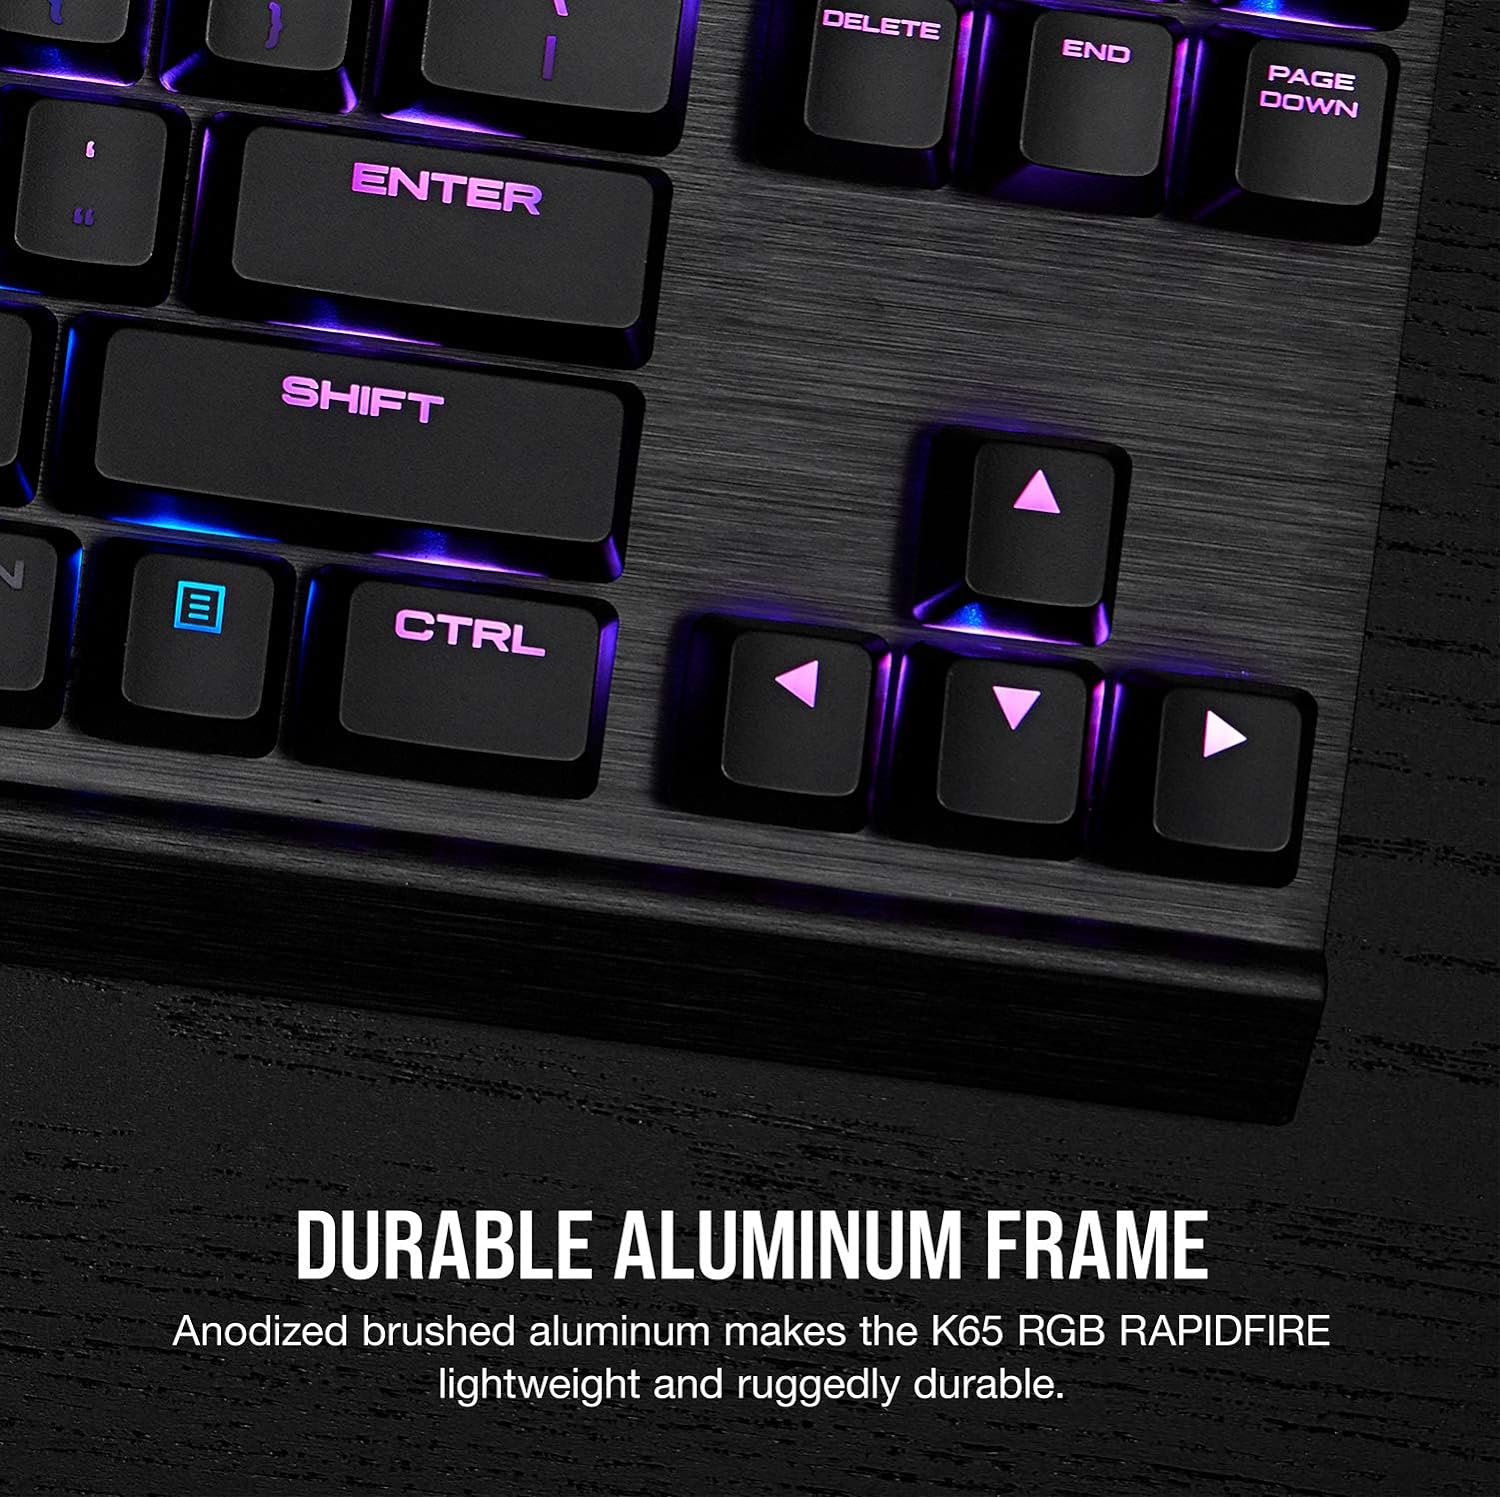 Corsair K65 RGB Rapidfire Gaming Keyboard - Ultra-fast 1.2mm actuation, 45g force, and dynamic backlighting. 0843591082181